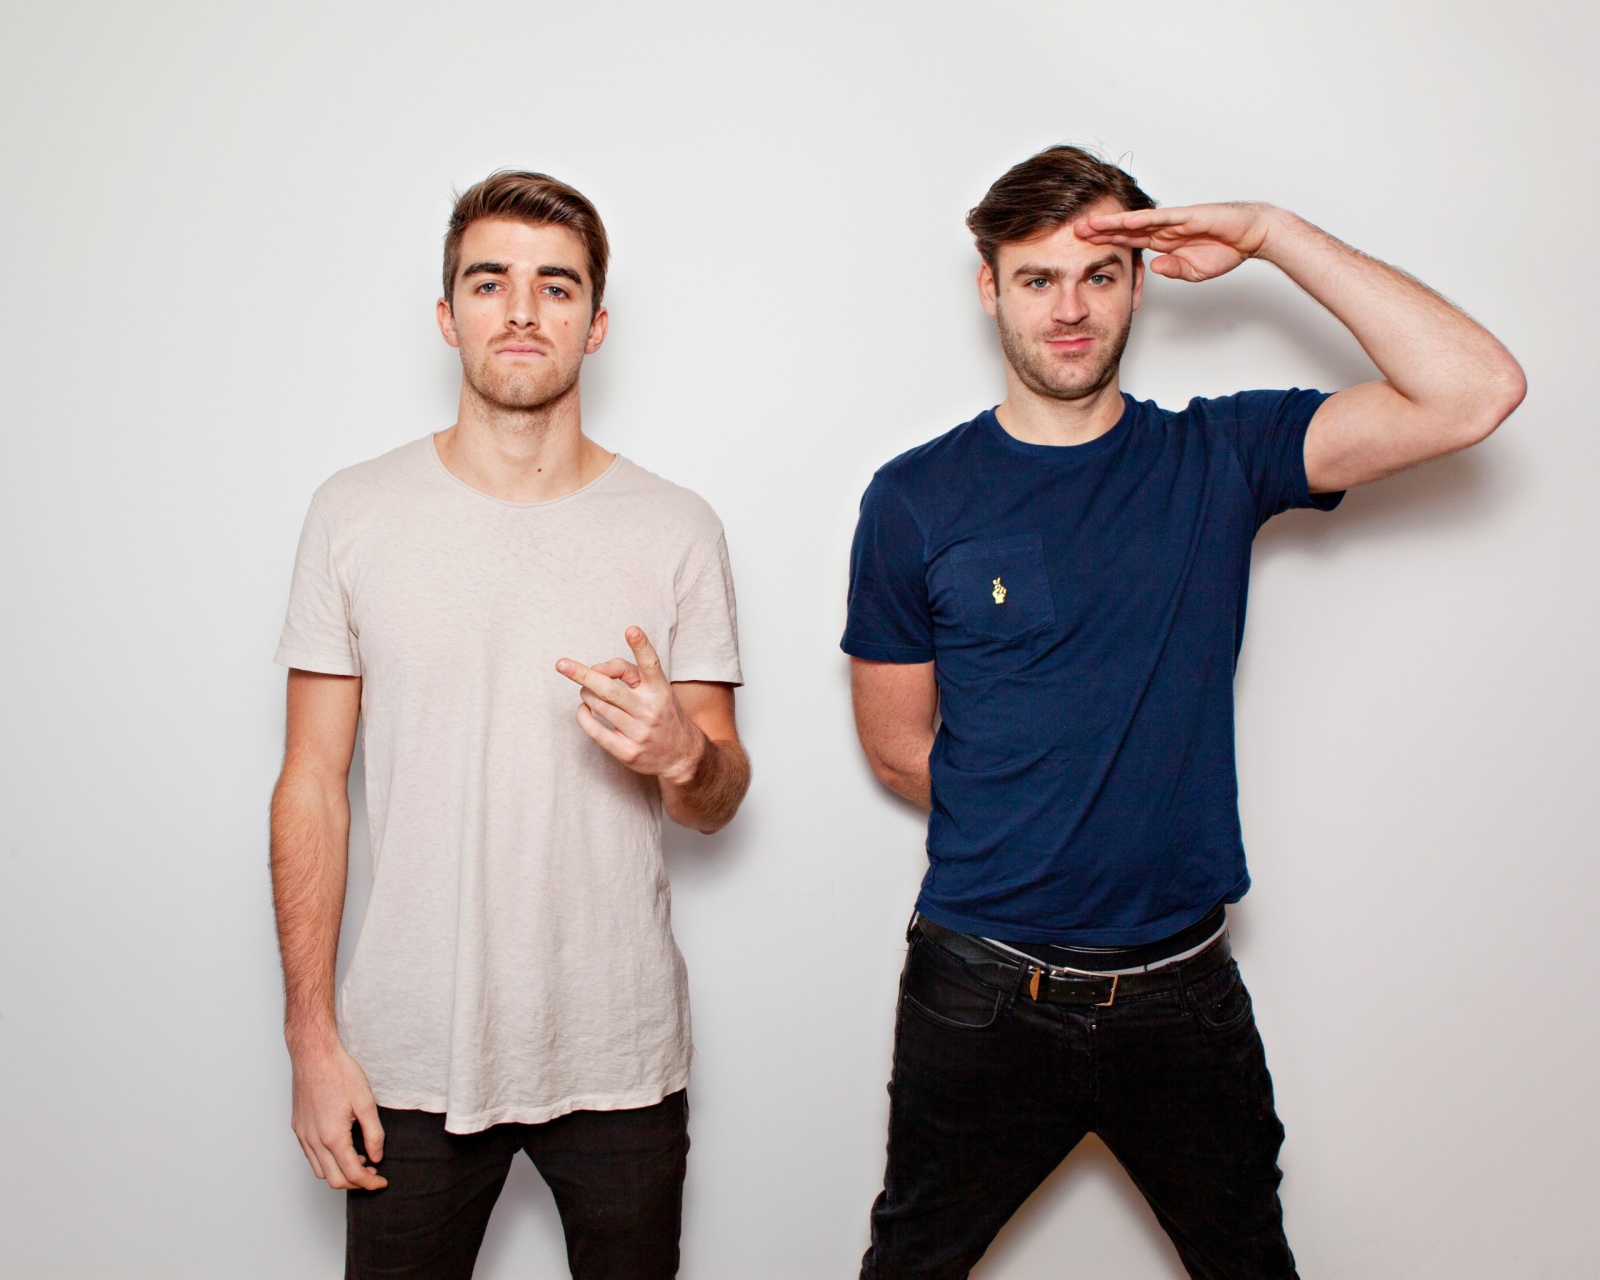 Das The Chainsmokers with Andrew Taggart and Alex Pall Wallpaper 1600x1280